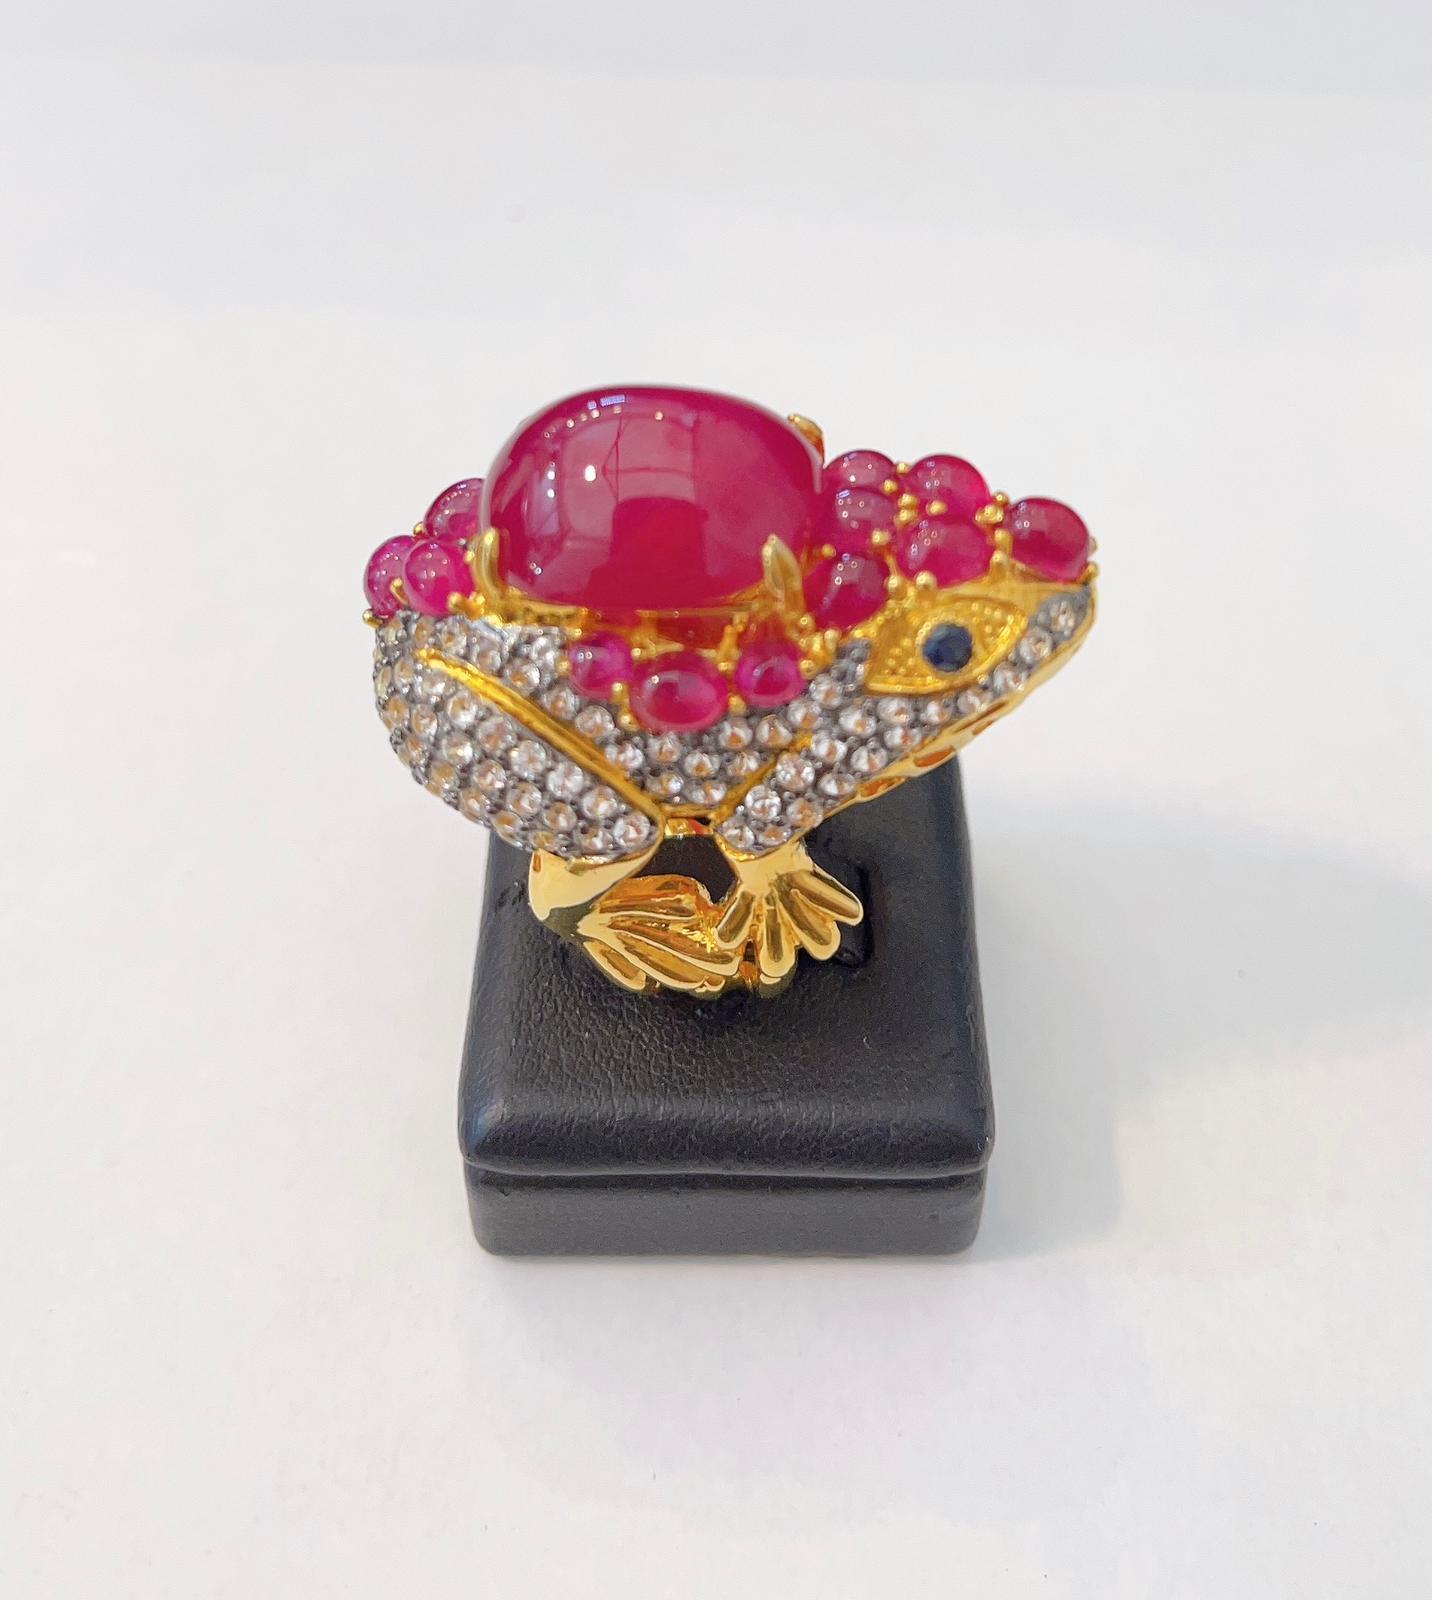 “Orient” Red Ruby & White Topaz Cocktail Ring Set in 22k Gold & Silver For Sale 9